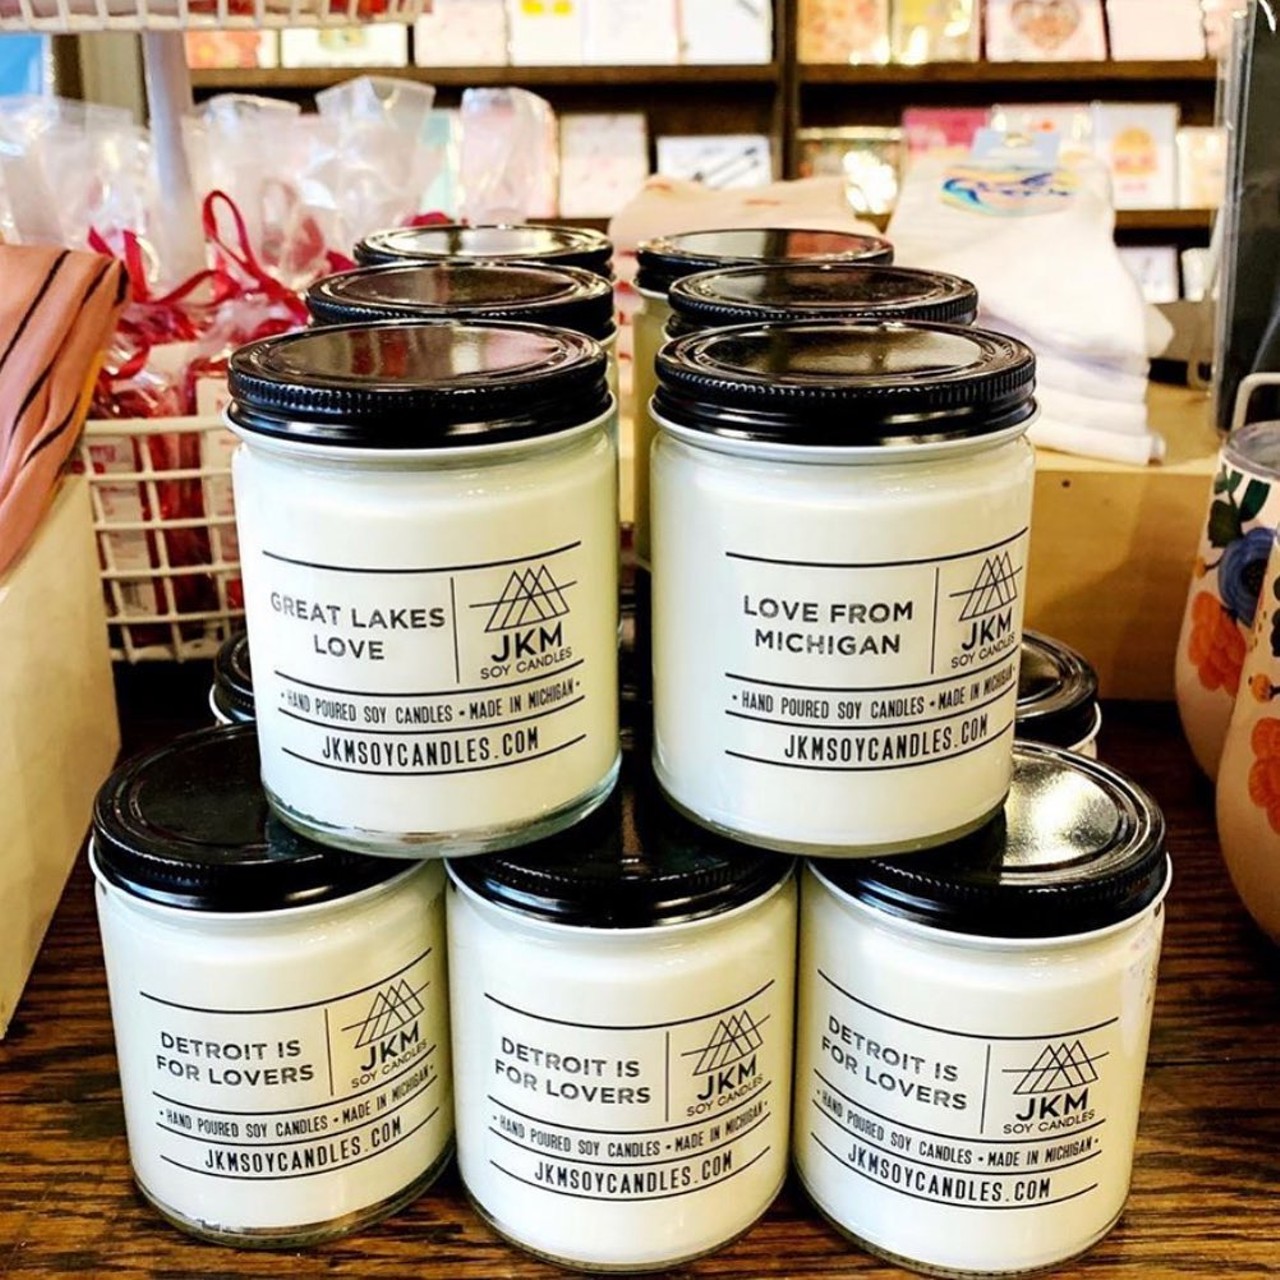  JKM Candles 
Wyandotte; 734-649-5053 
Nearly eight years ago stay-at-home mom Jenny Rostkowski started JKM Candles, and we are so glad she did. Some of our favorite scents include Butt Naked, Toasted Marshmallow, Vernor&#146;s, Domestic Goddess, and her Harry Potter-themed collection. Her candles are sold around town at shops like Kitty Deluxe, City Bird, The Eyrie, and Well Done Goods.
Photo via JKM Soy Candles / Facebook 